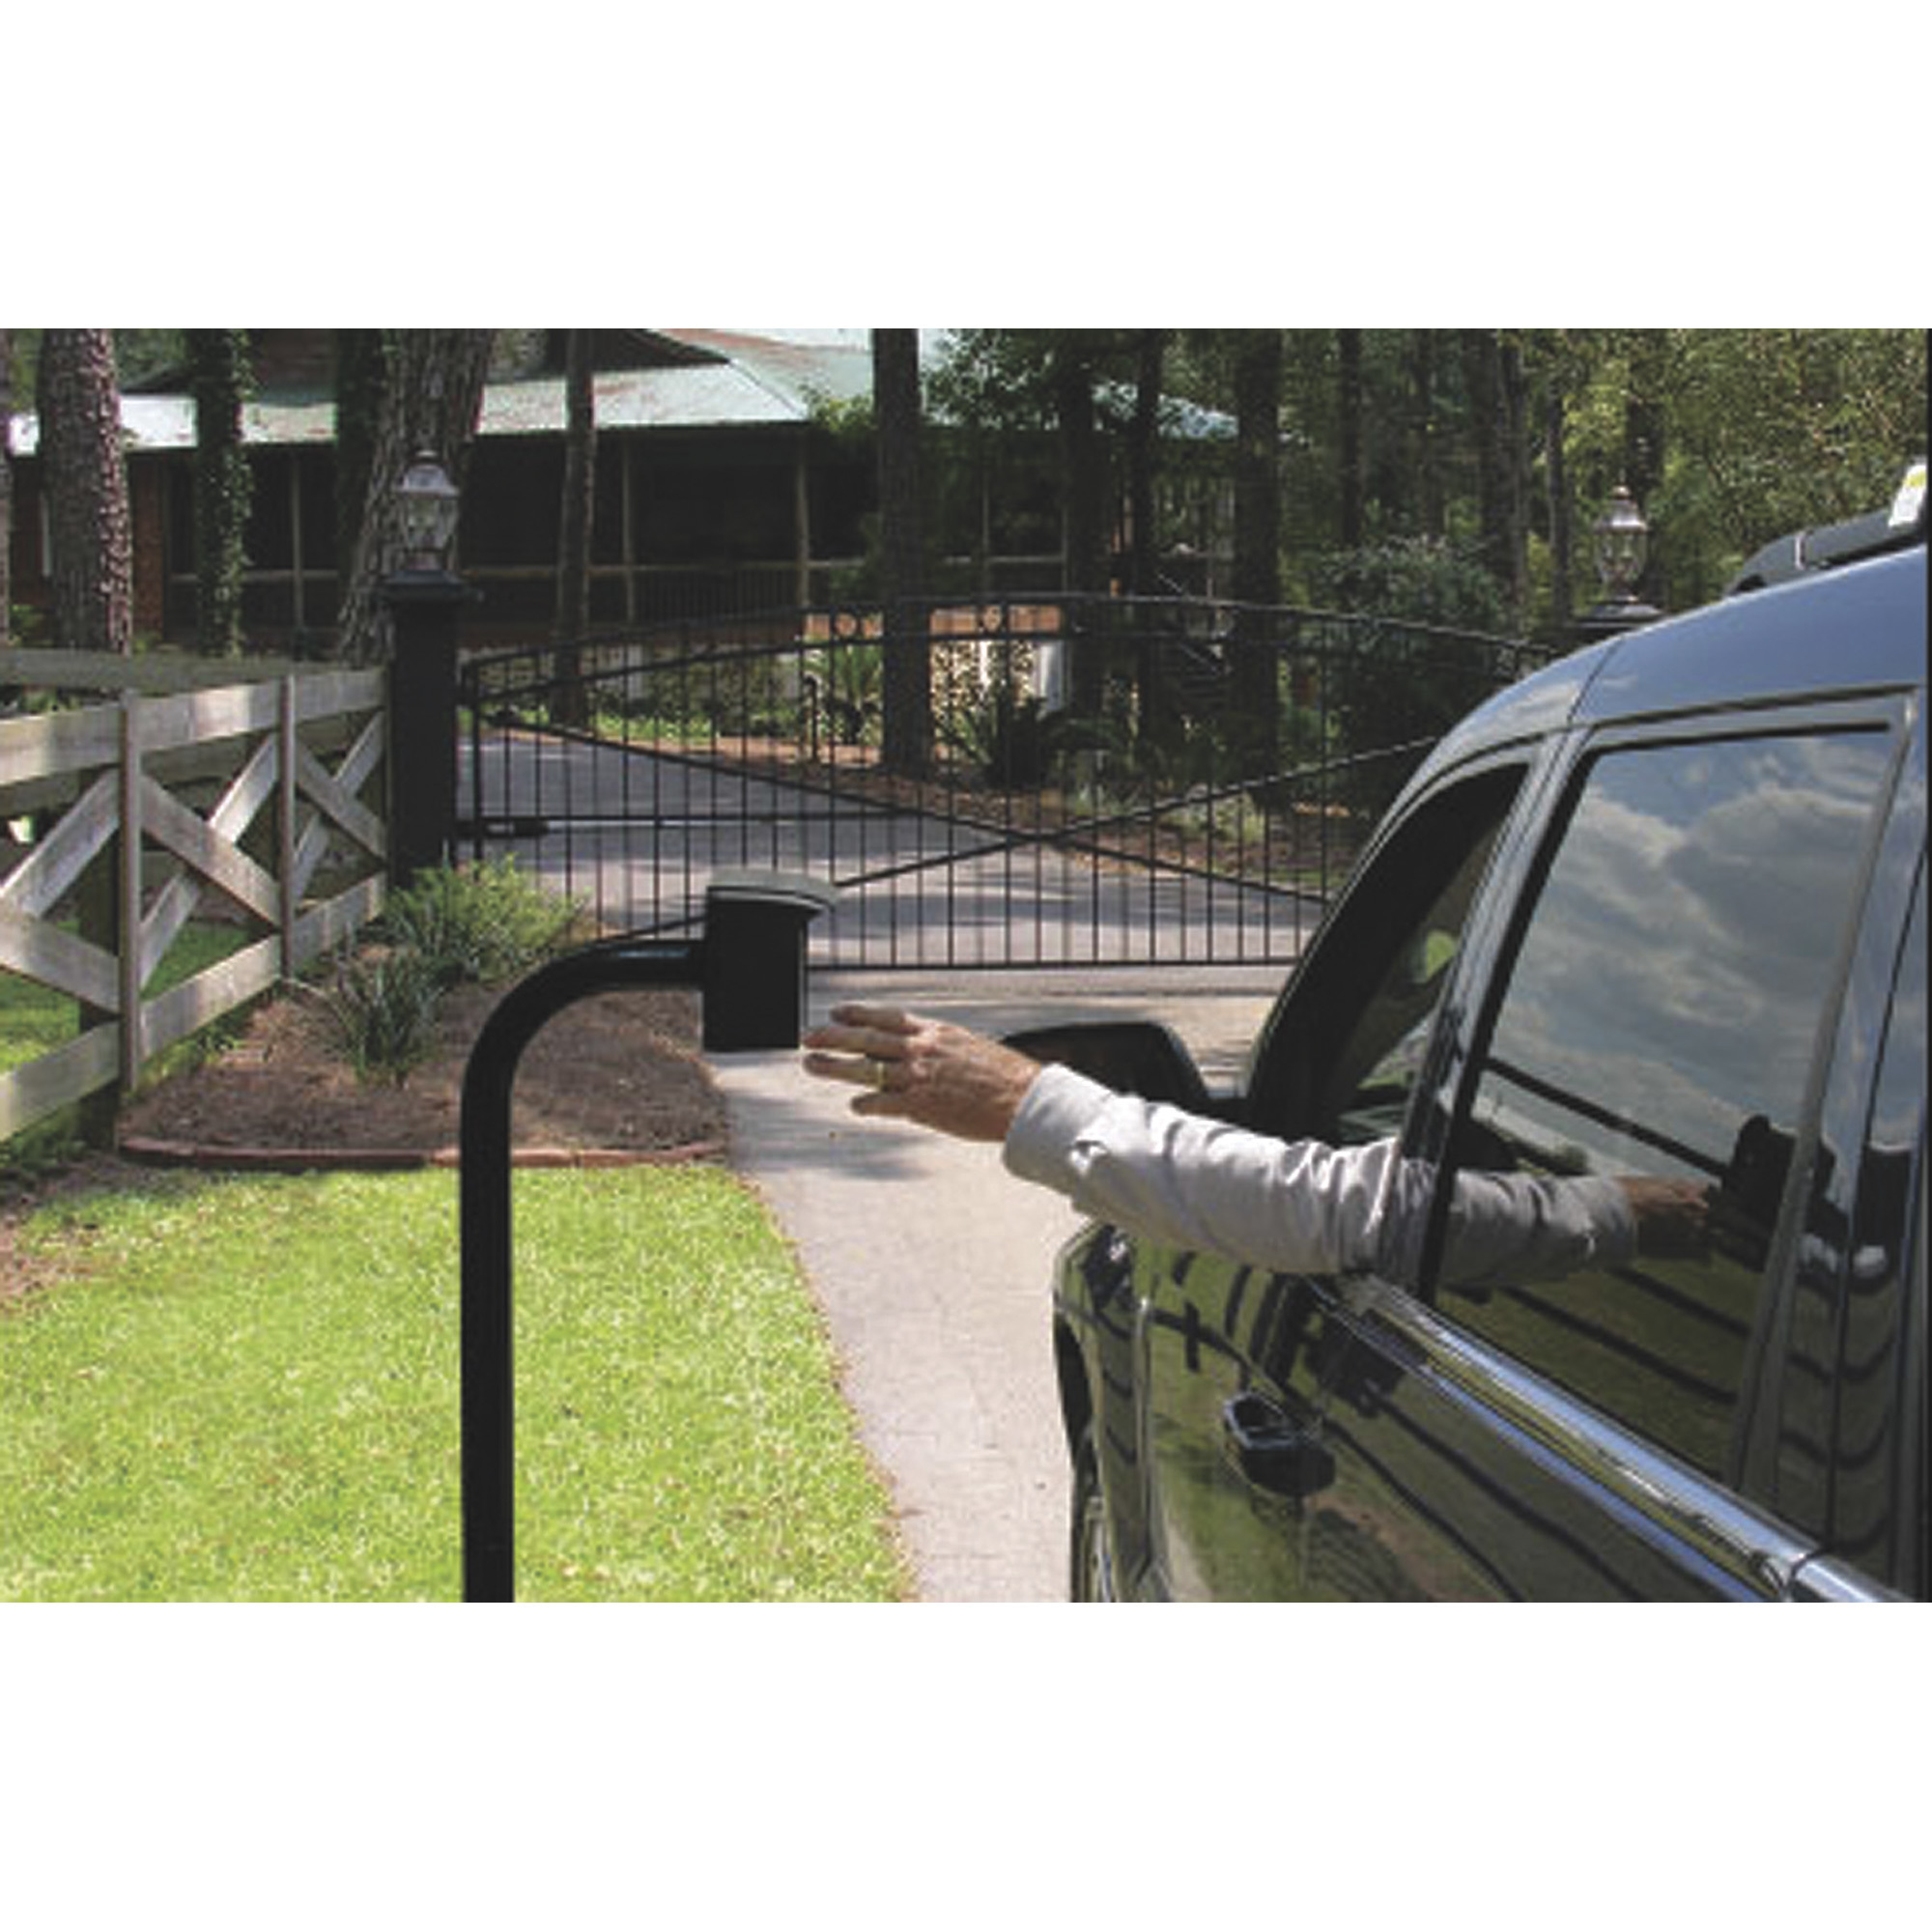 Mighty Mule Gate Opening Wand Sensor, Model# FM138 Northern Tool